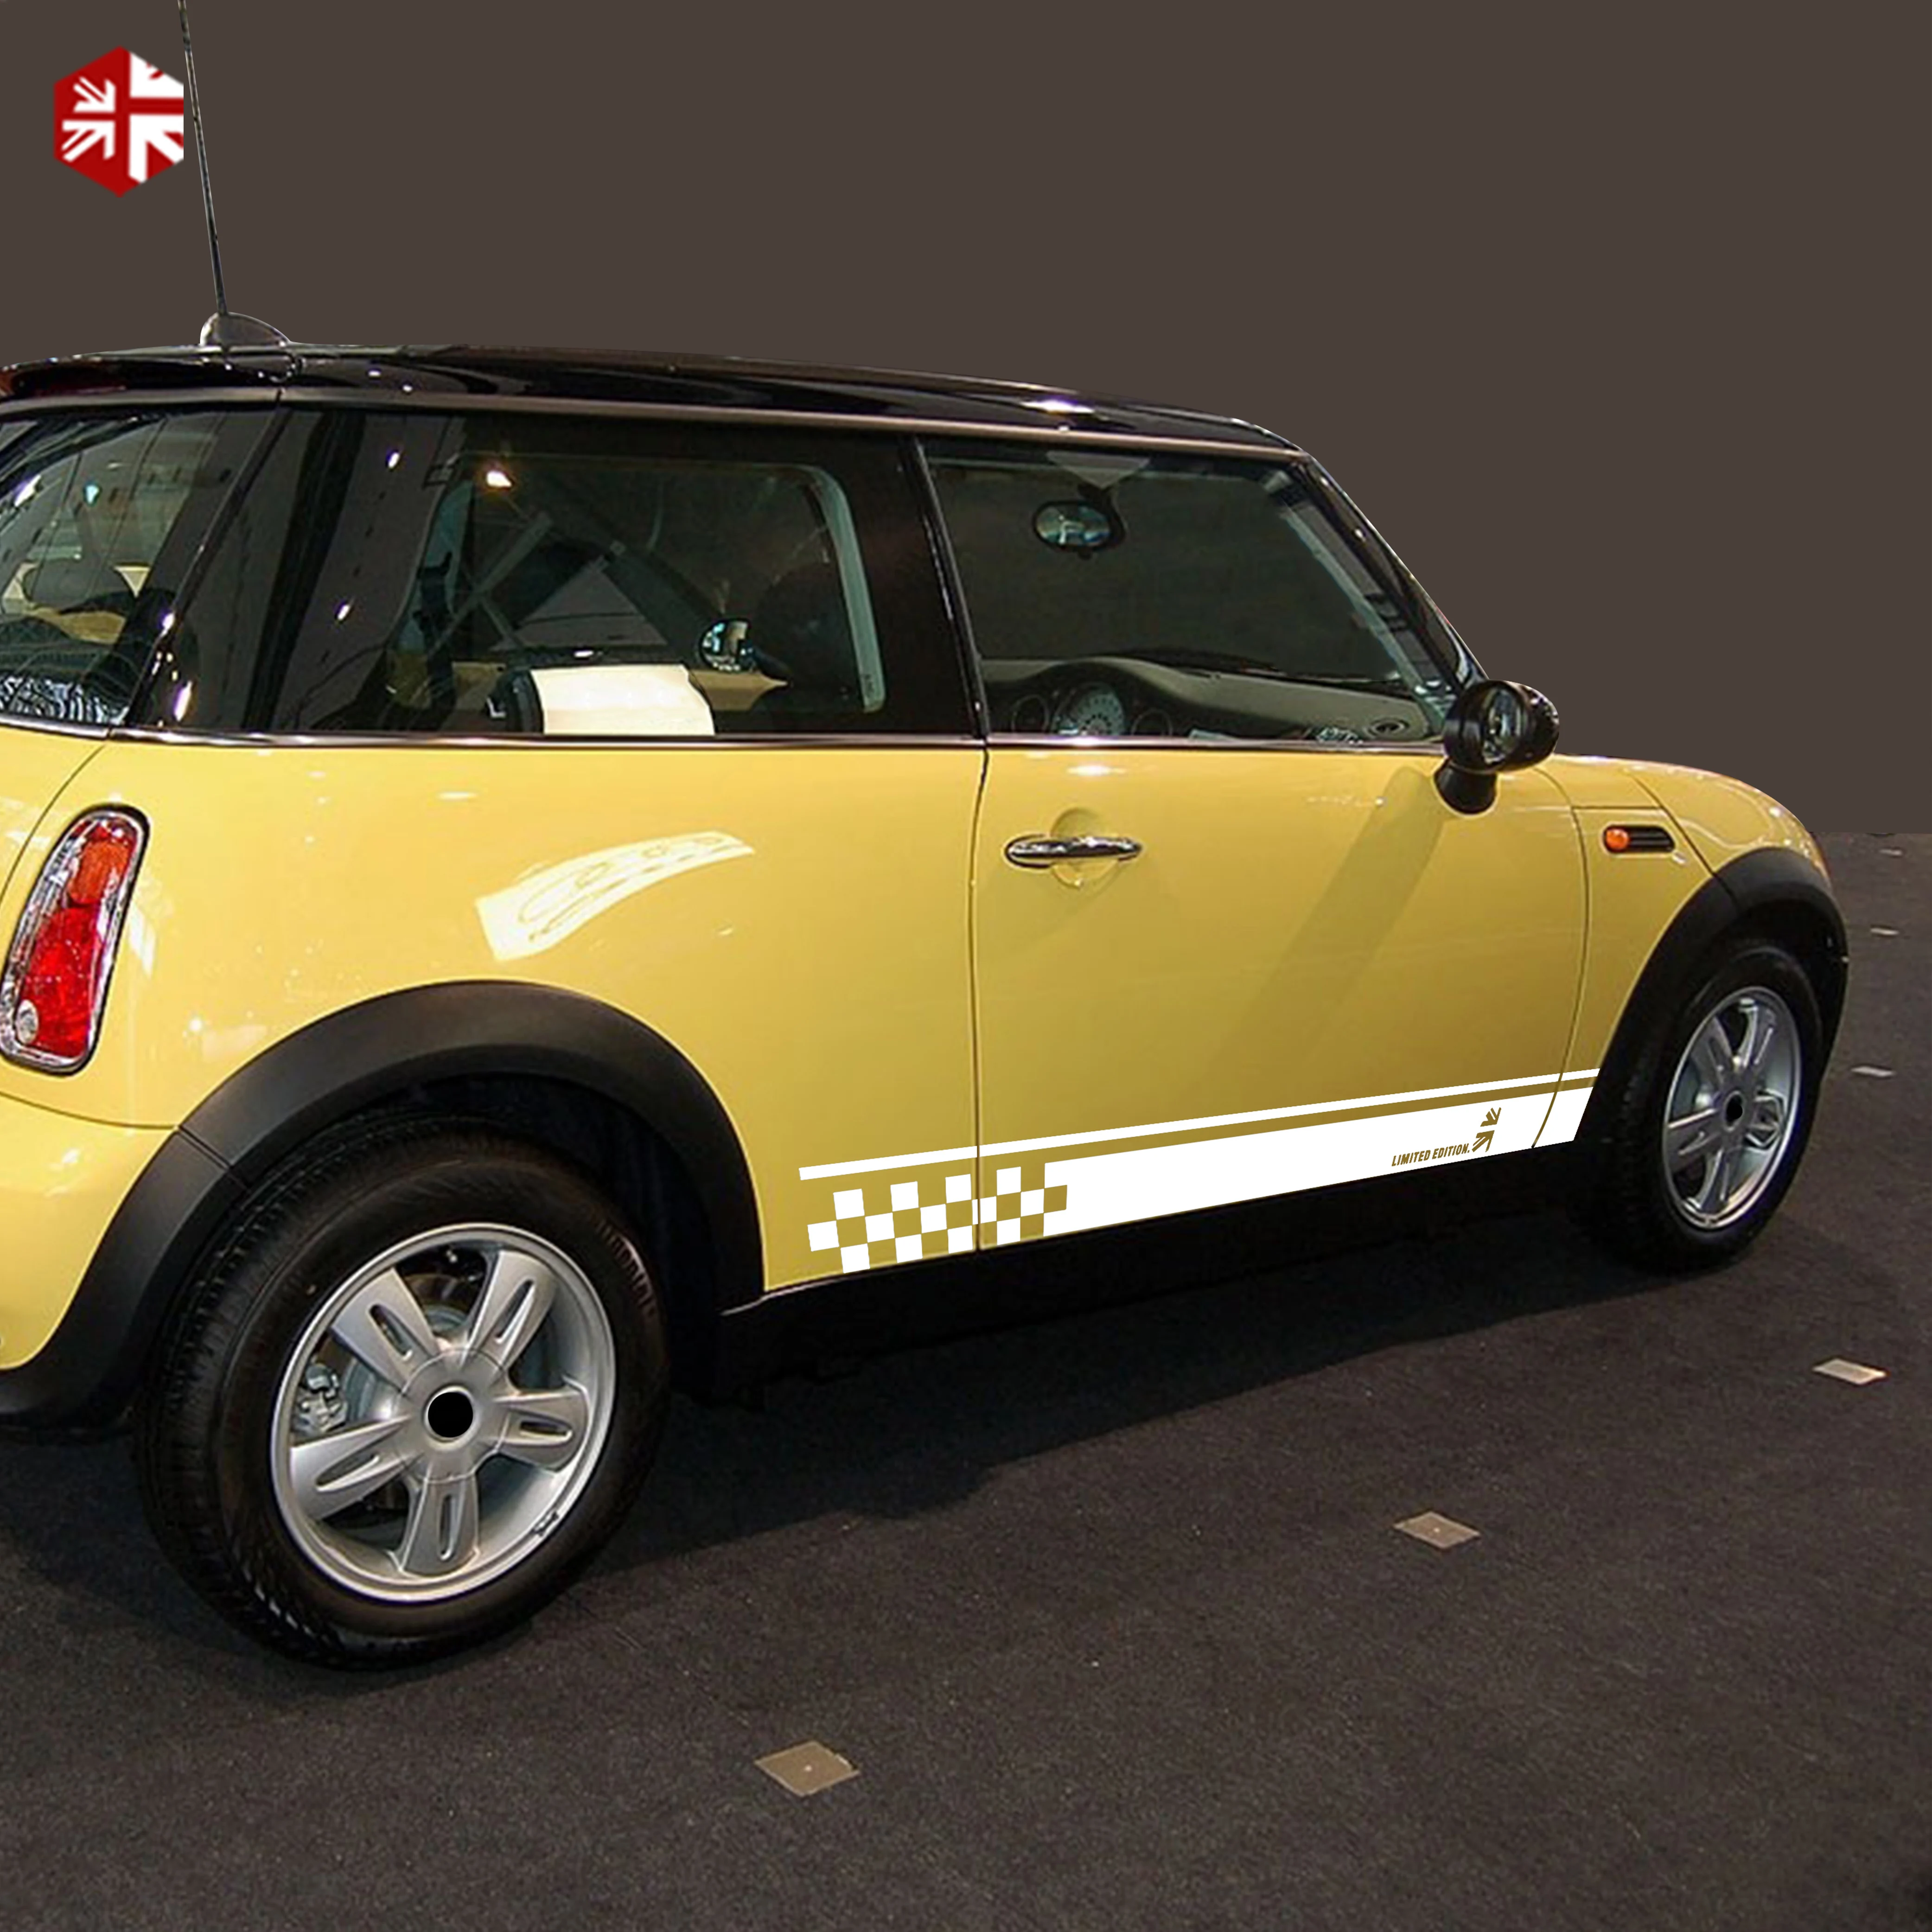 2X Union Jack Styling Car Door Side Stripe Sticker Limited Edition Body Decal For MINI Cooper S One R50 R52 R53 JCW Accessories